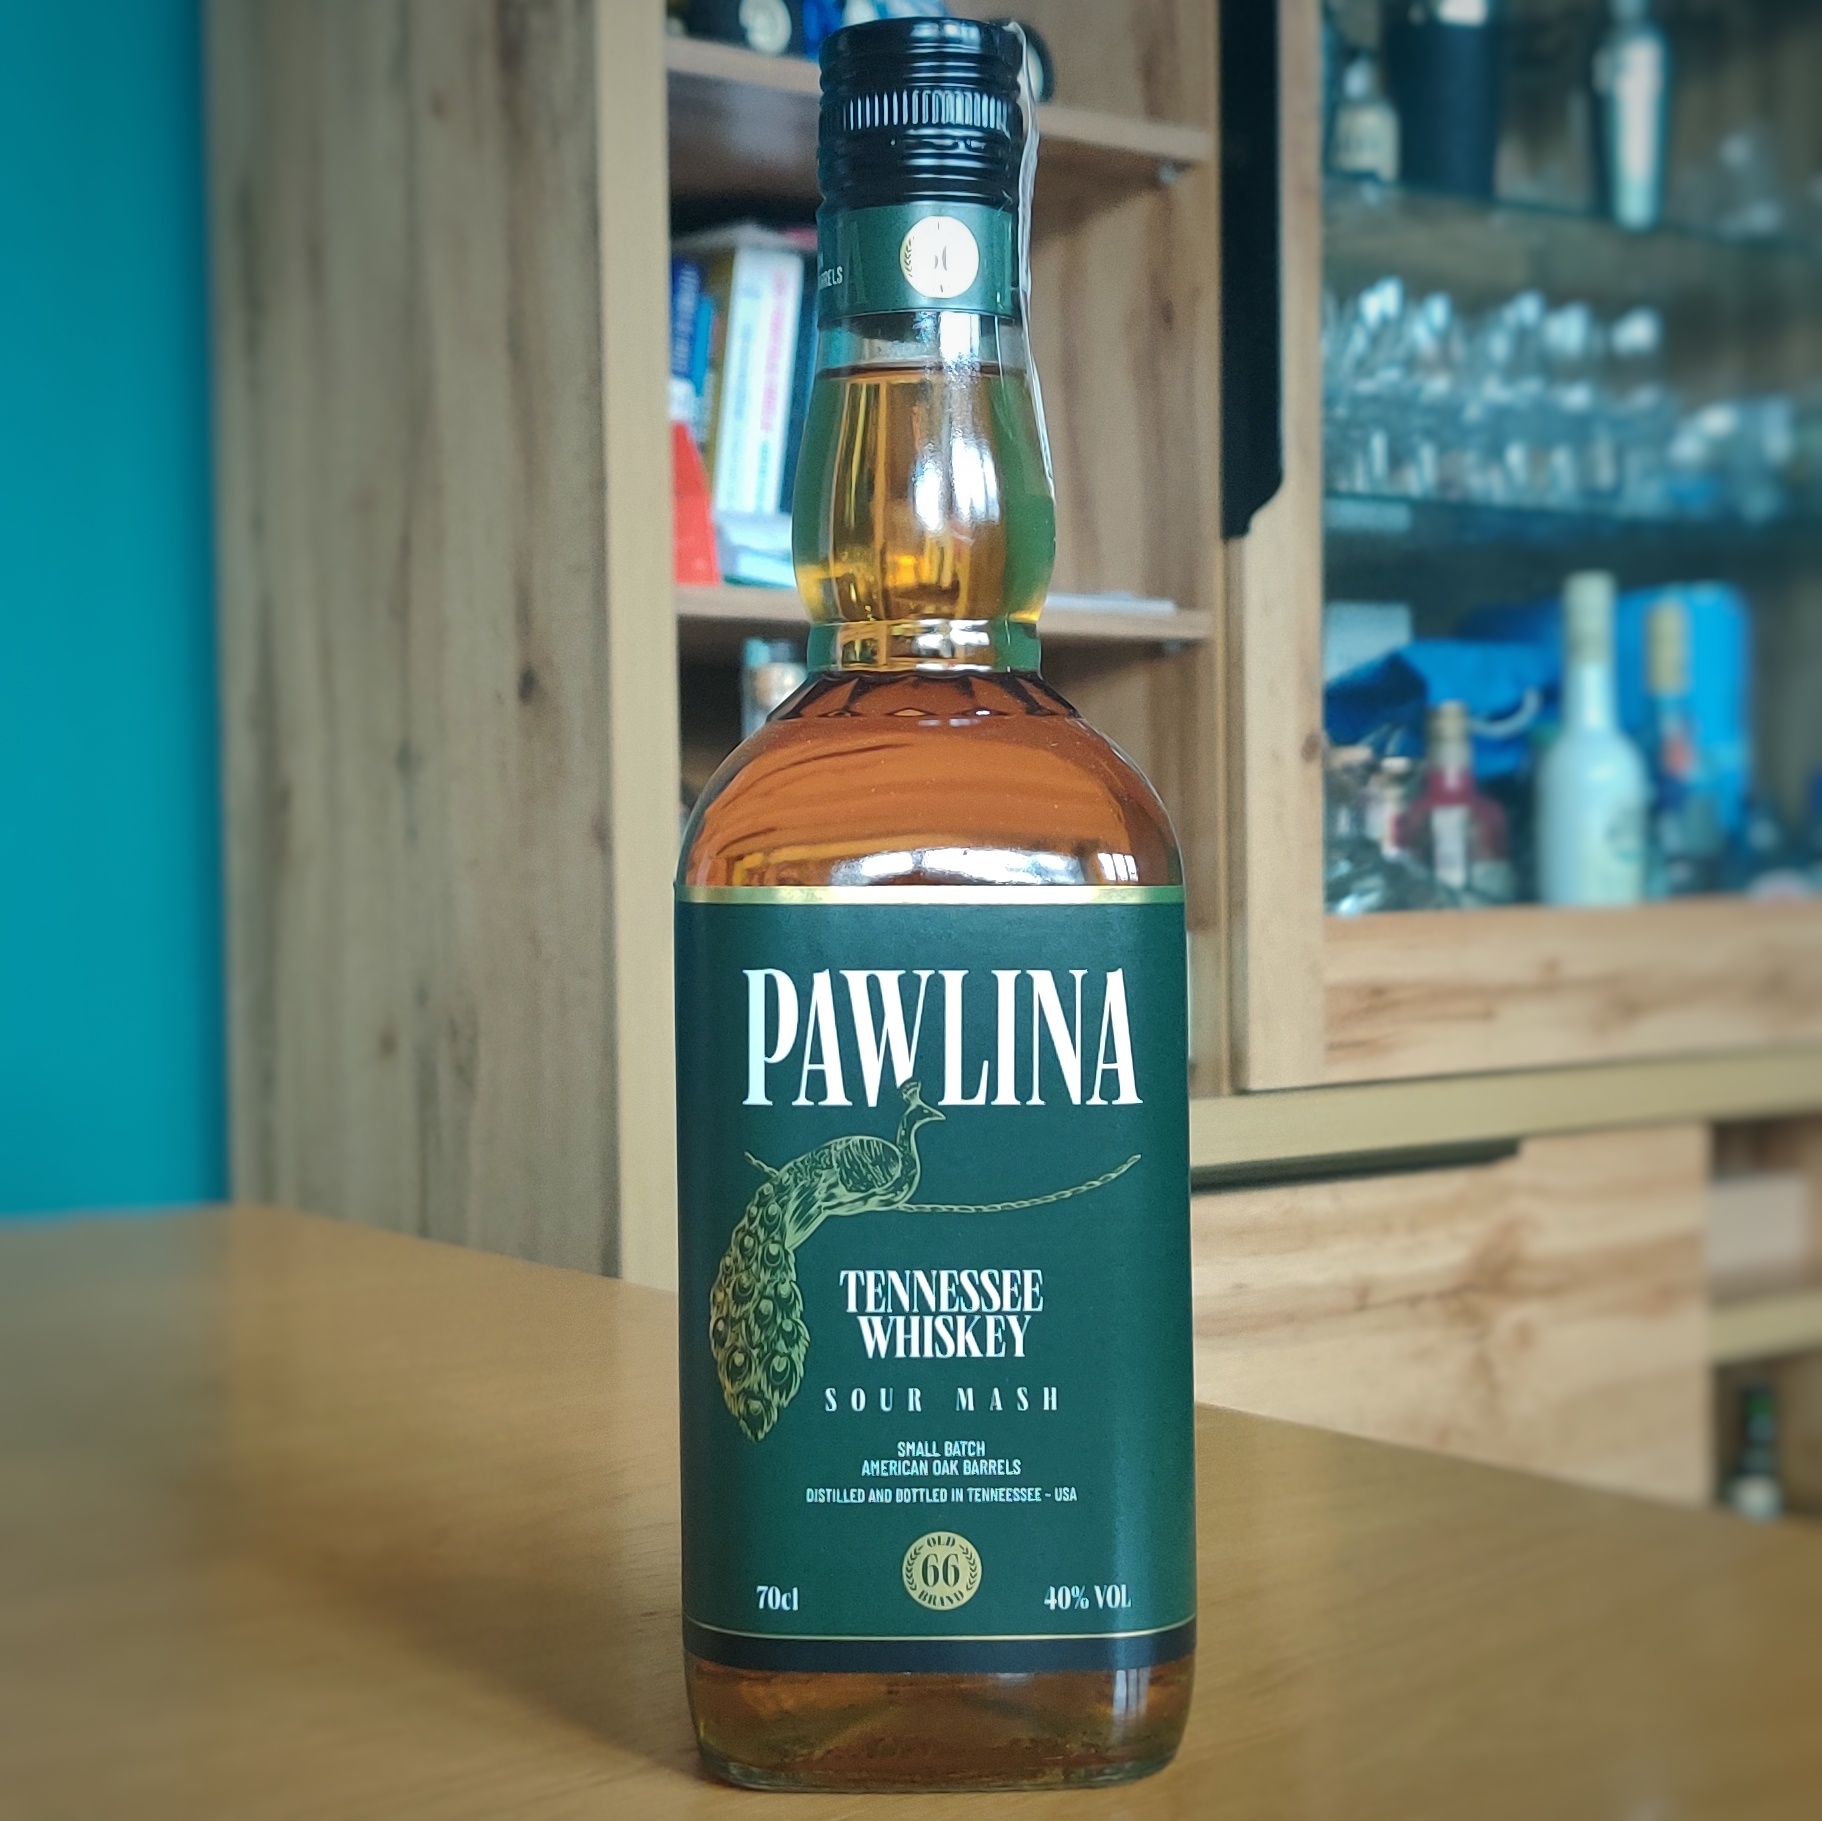 Pawlina 66 Tennessee Whiskey